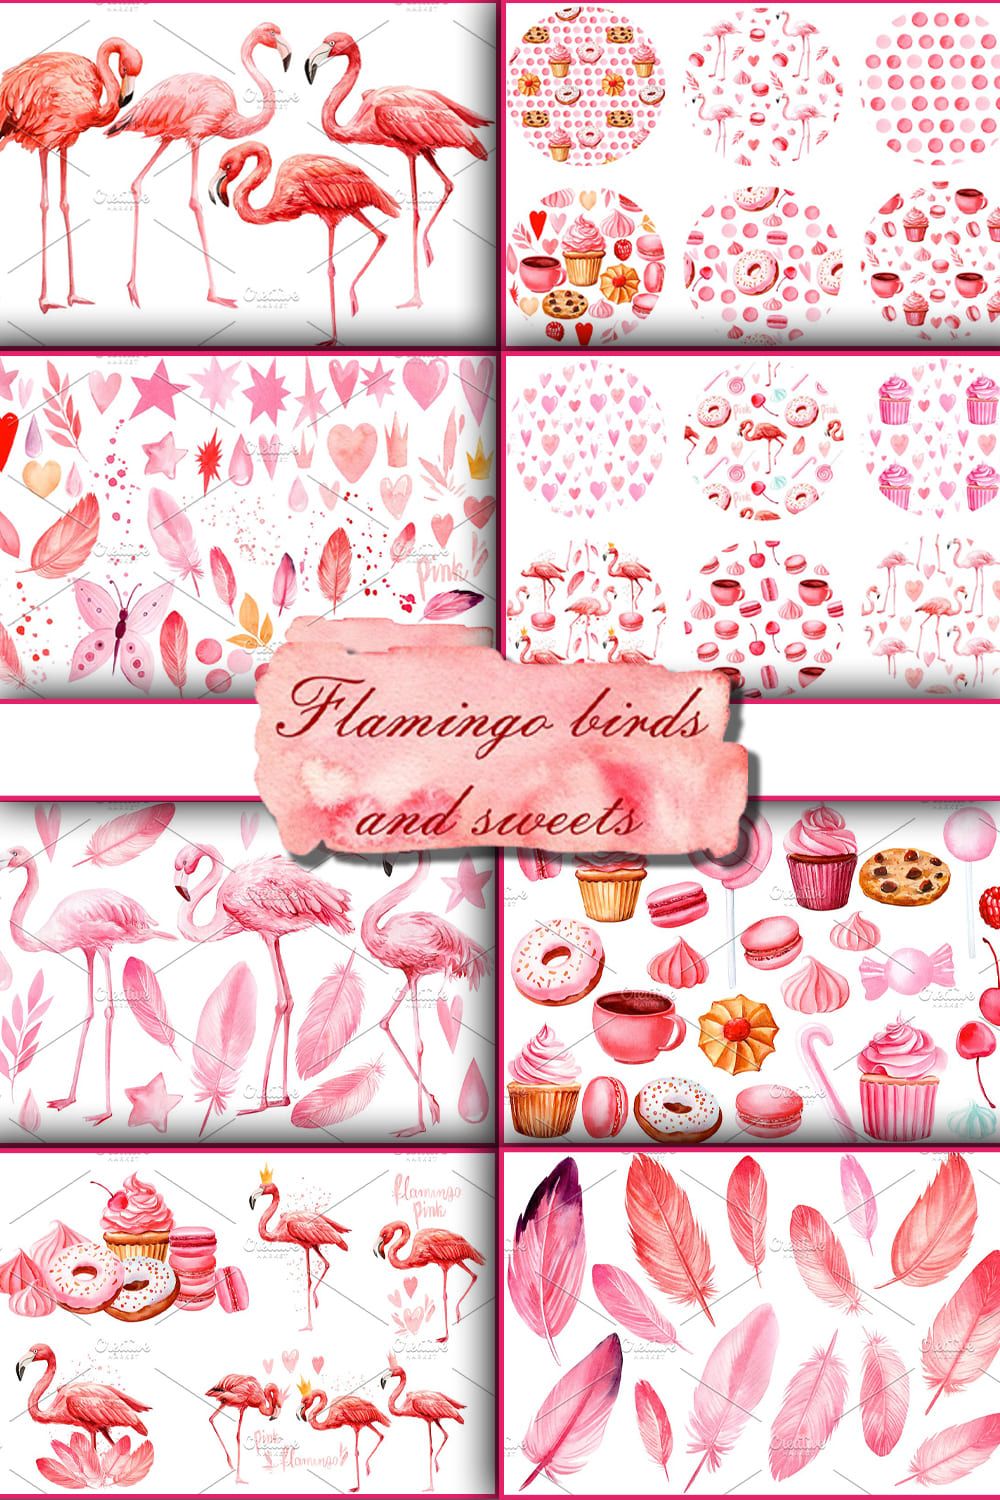 Flamingo Birds and Sweets.